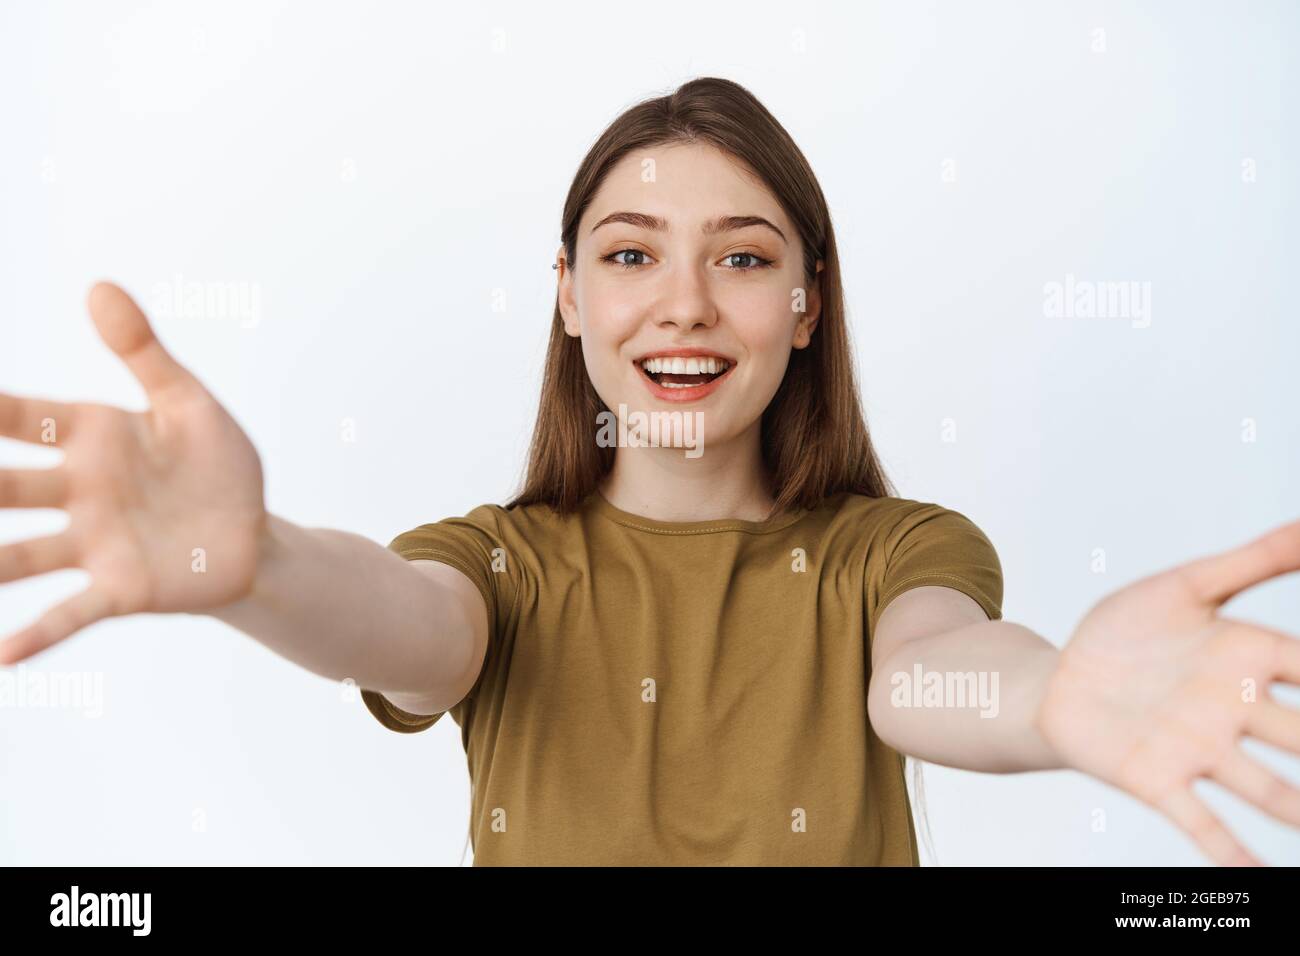 Beautiful girl stretching out hands and smiling, reaching for hug or to  hold something in her arms, standing in t-shirt against white background  Stock Photo - Alamy